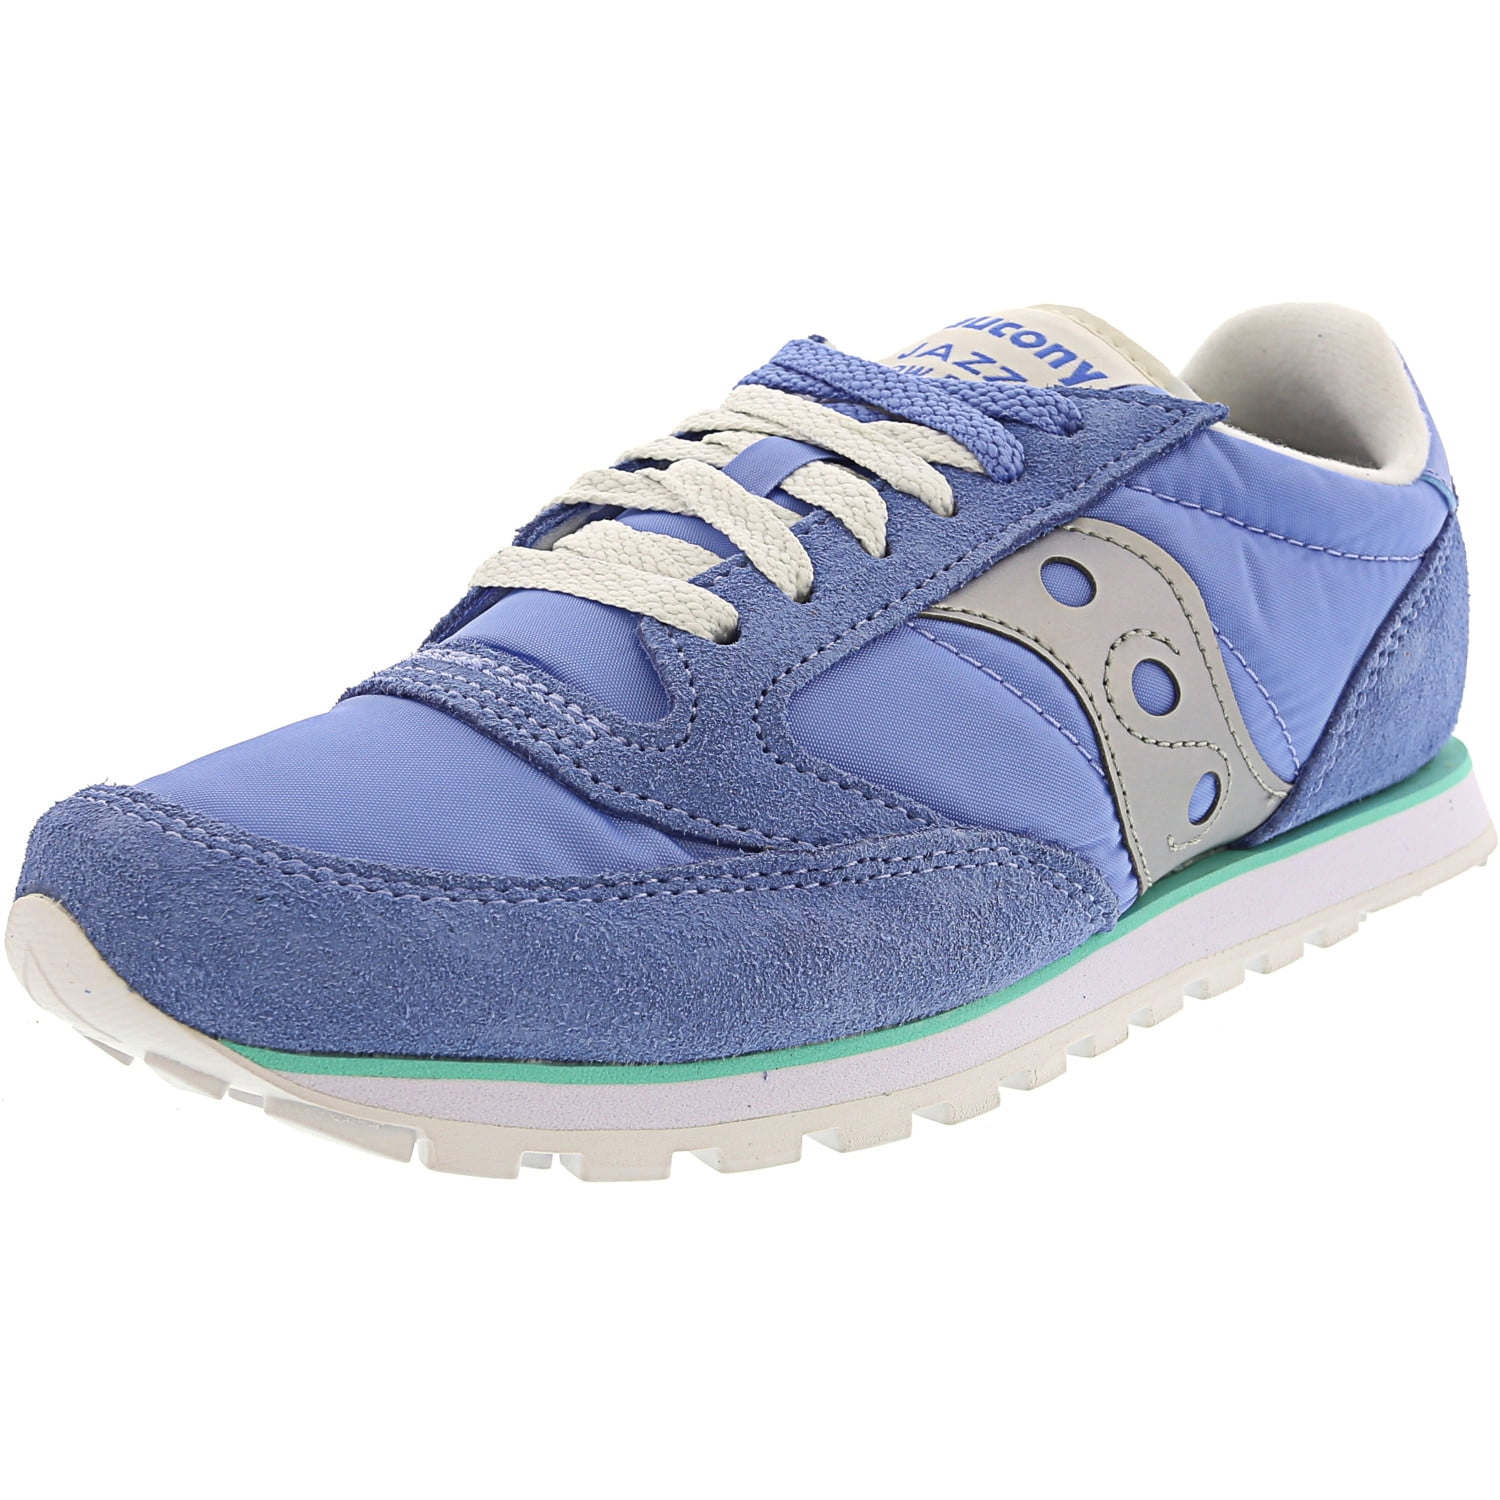 Saucony - Saucony Women's Jazz Low Pro Blue/Green/Silver Ankle-High ...